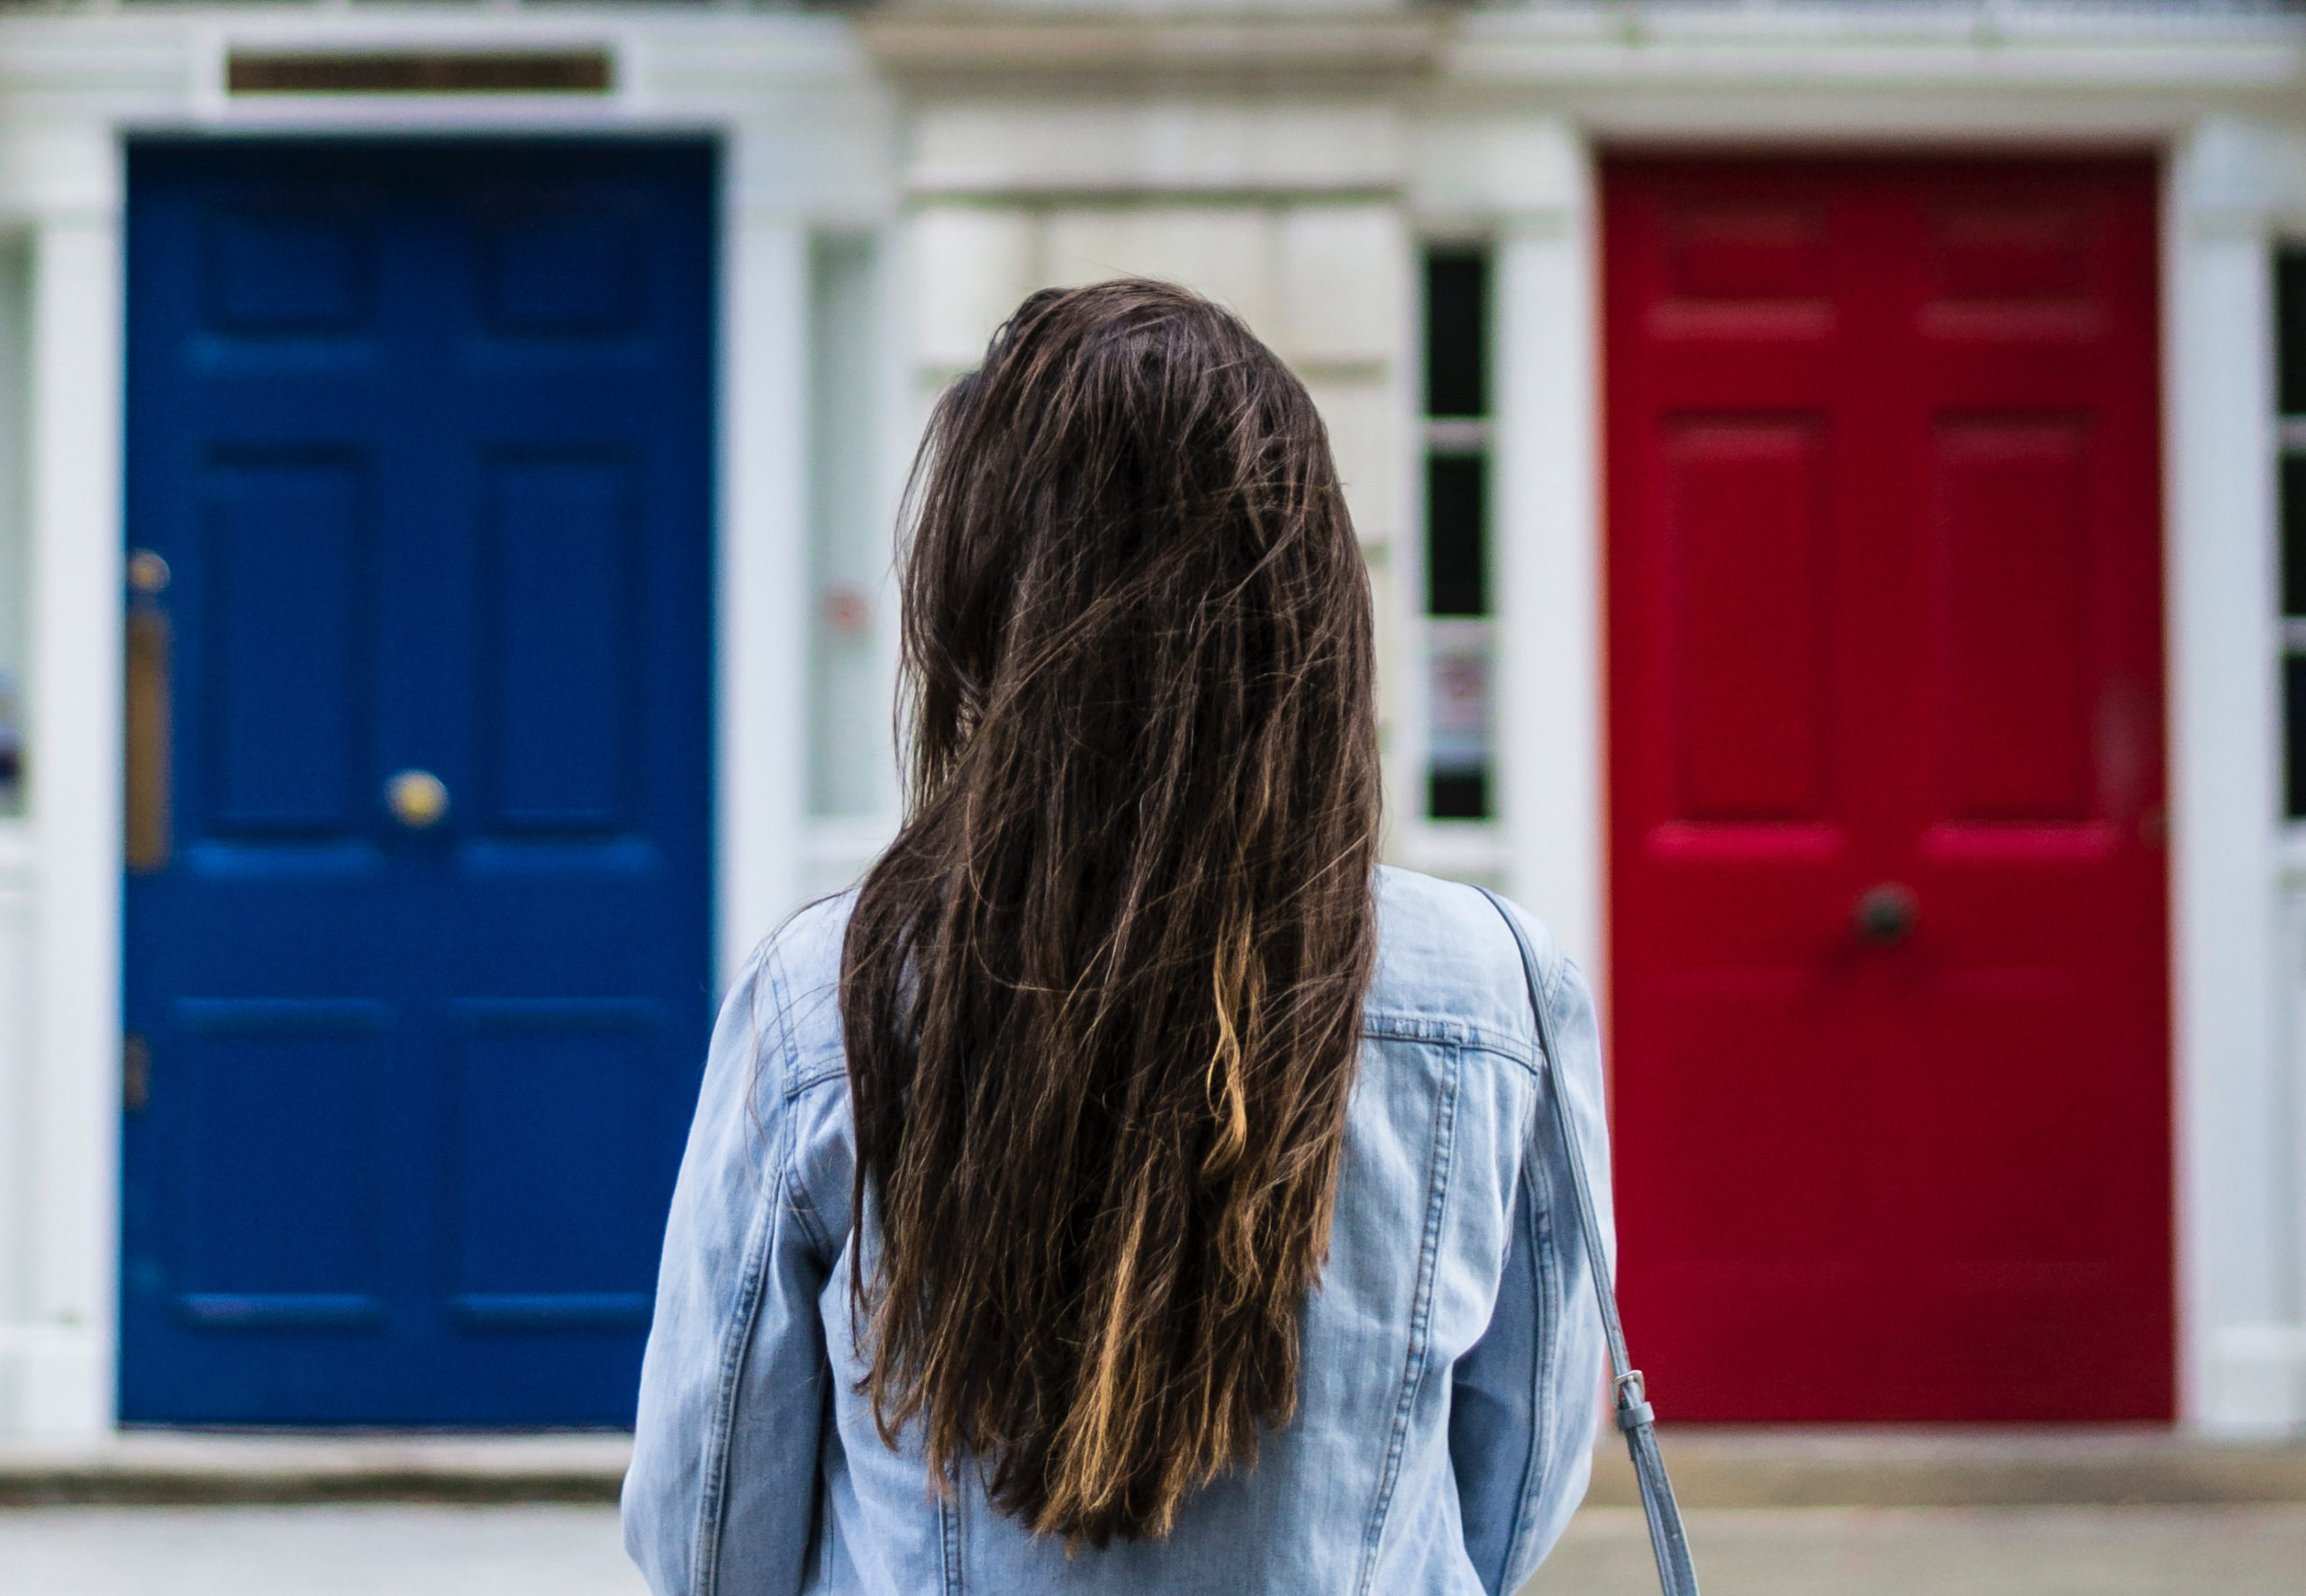 A woman with her back facing the camera standing between a blue door and a red door